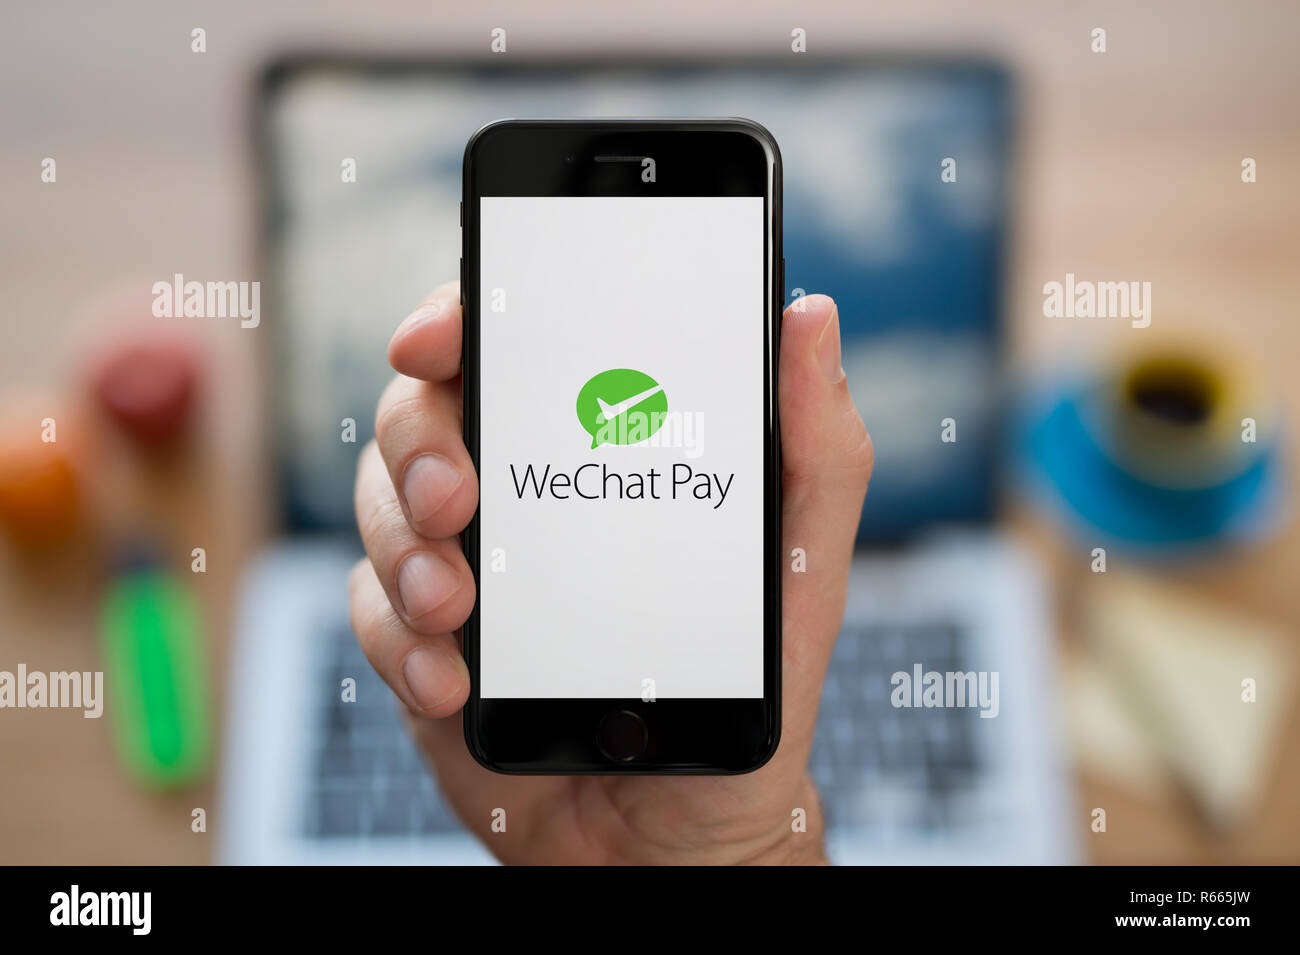 A man looks at his iPhone which displays the WeChat Pay logo, while sat at his computer desk (Editorial use only). Stock Photo